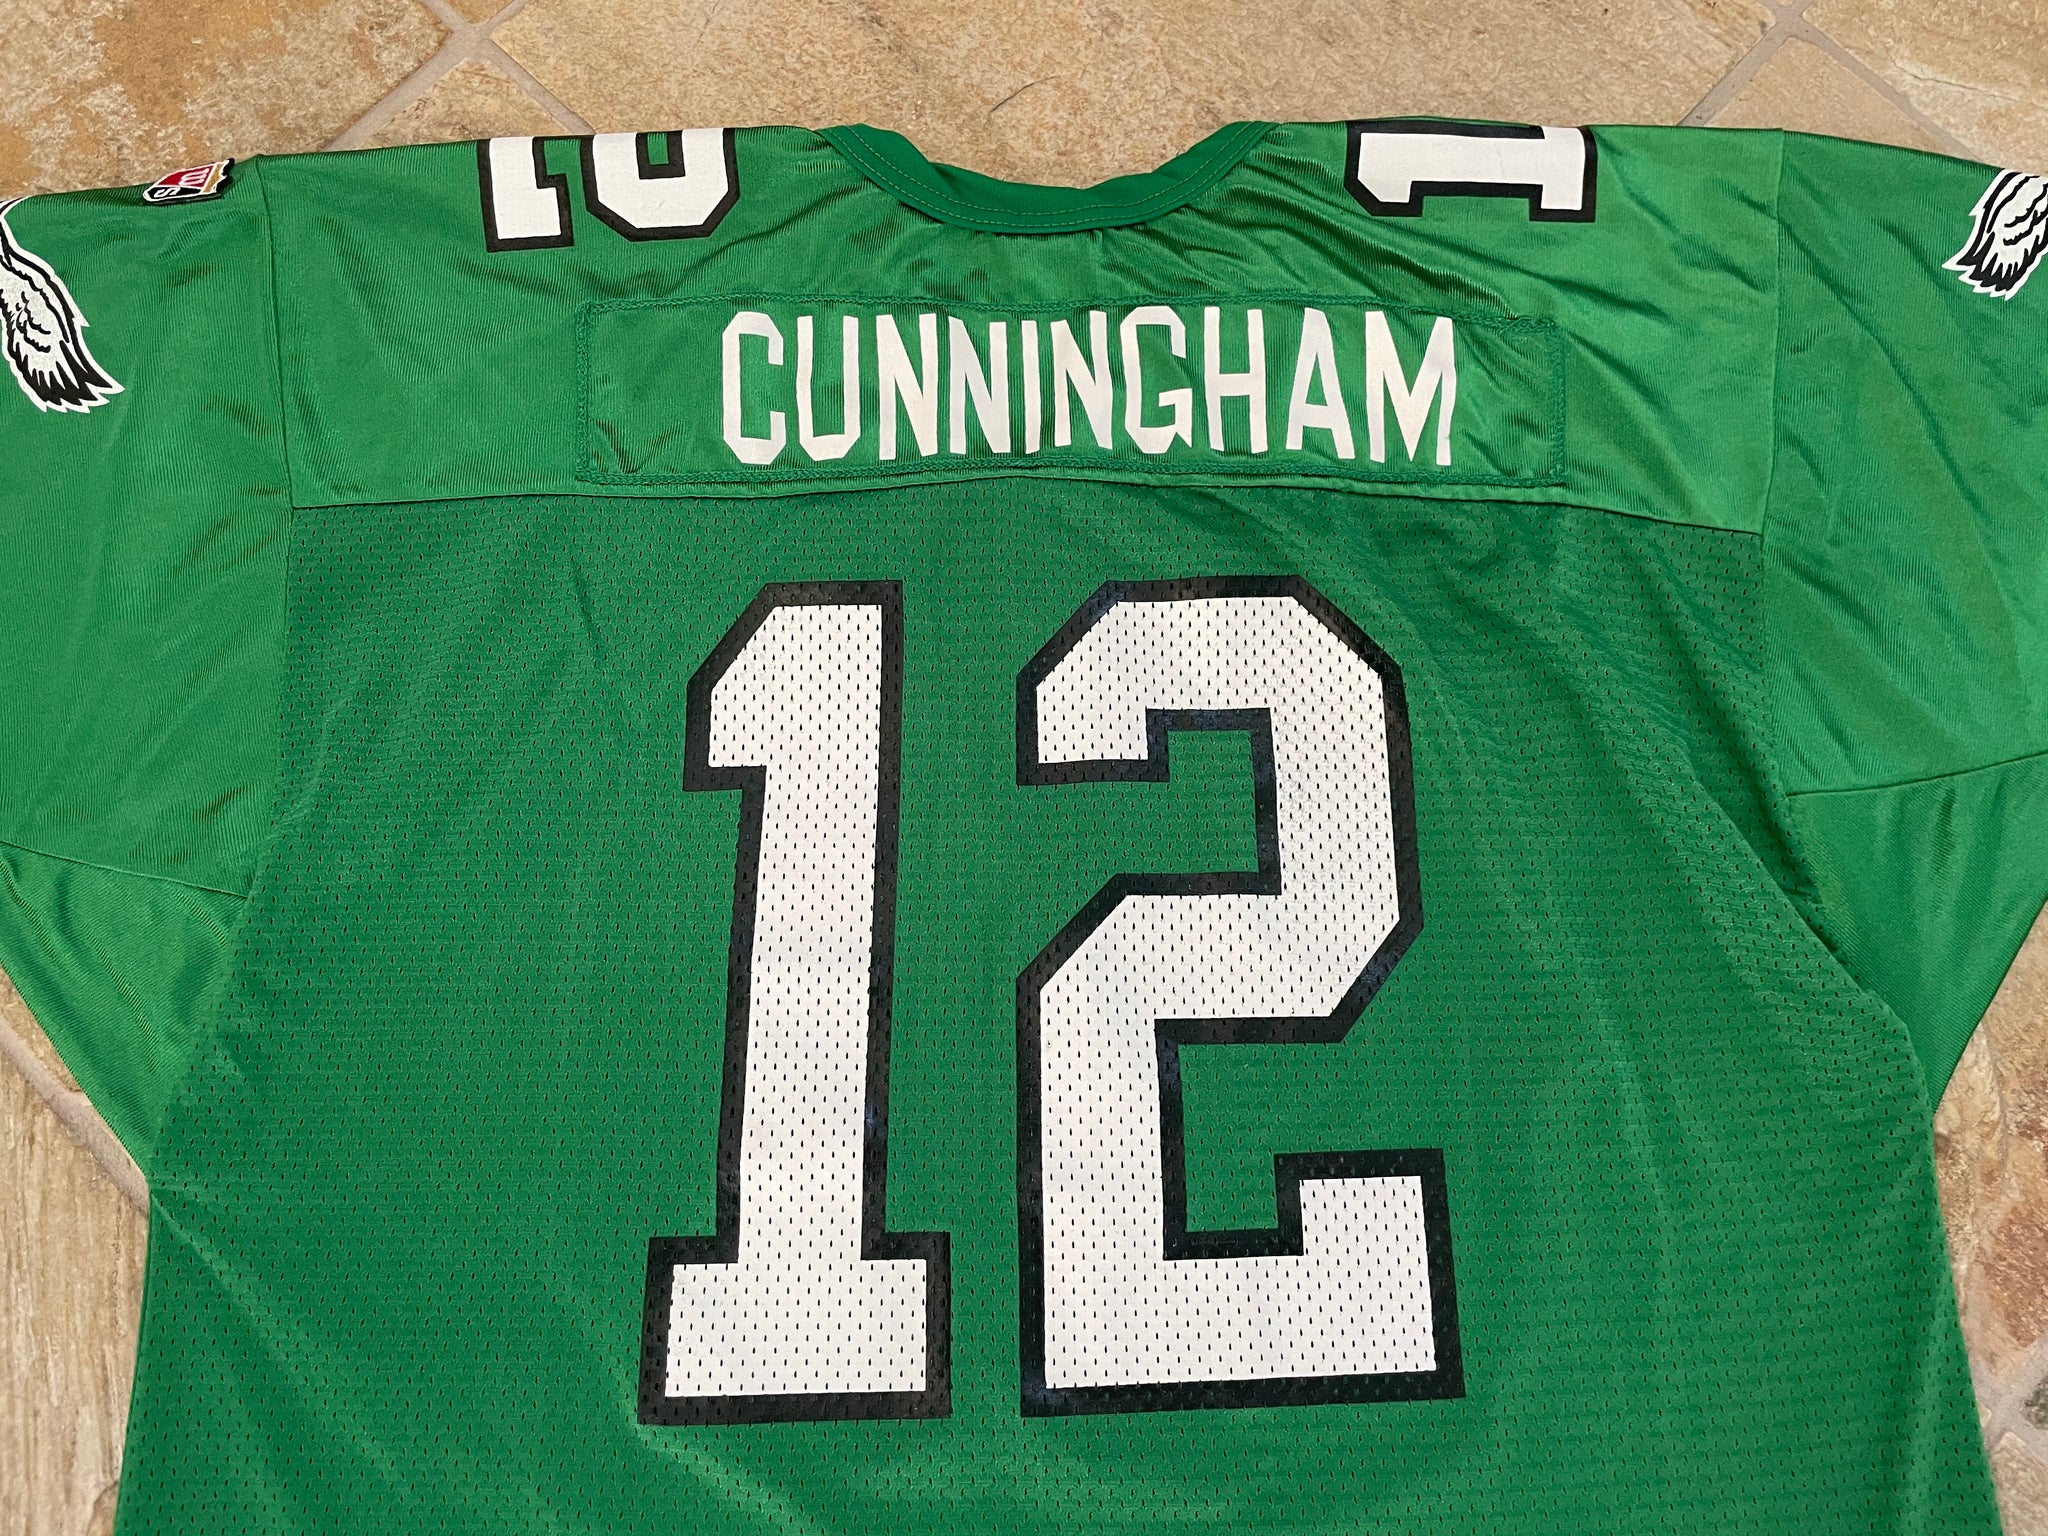 Image Gallery of Randall Cunningham